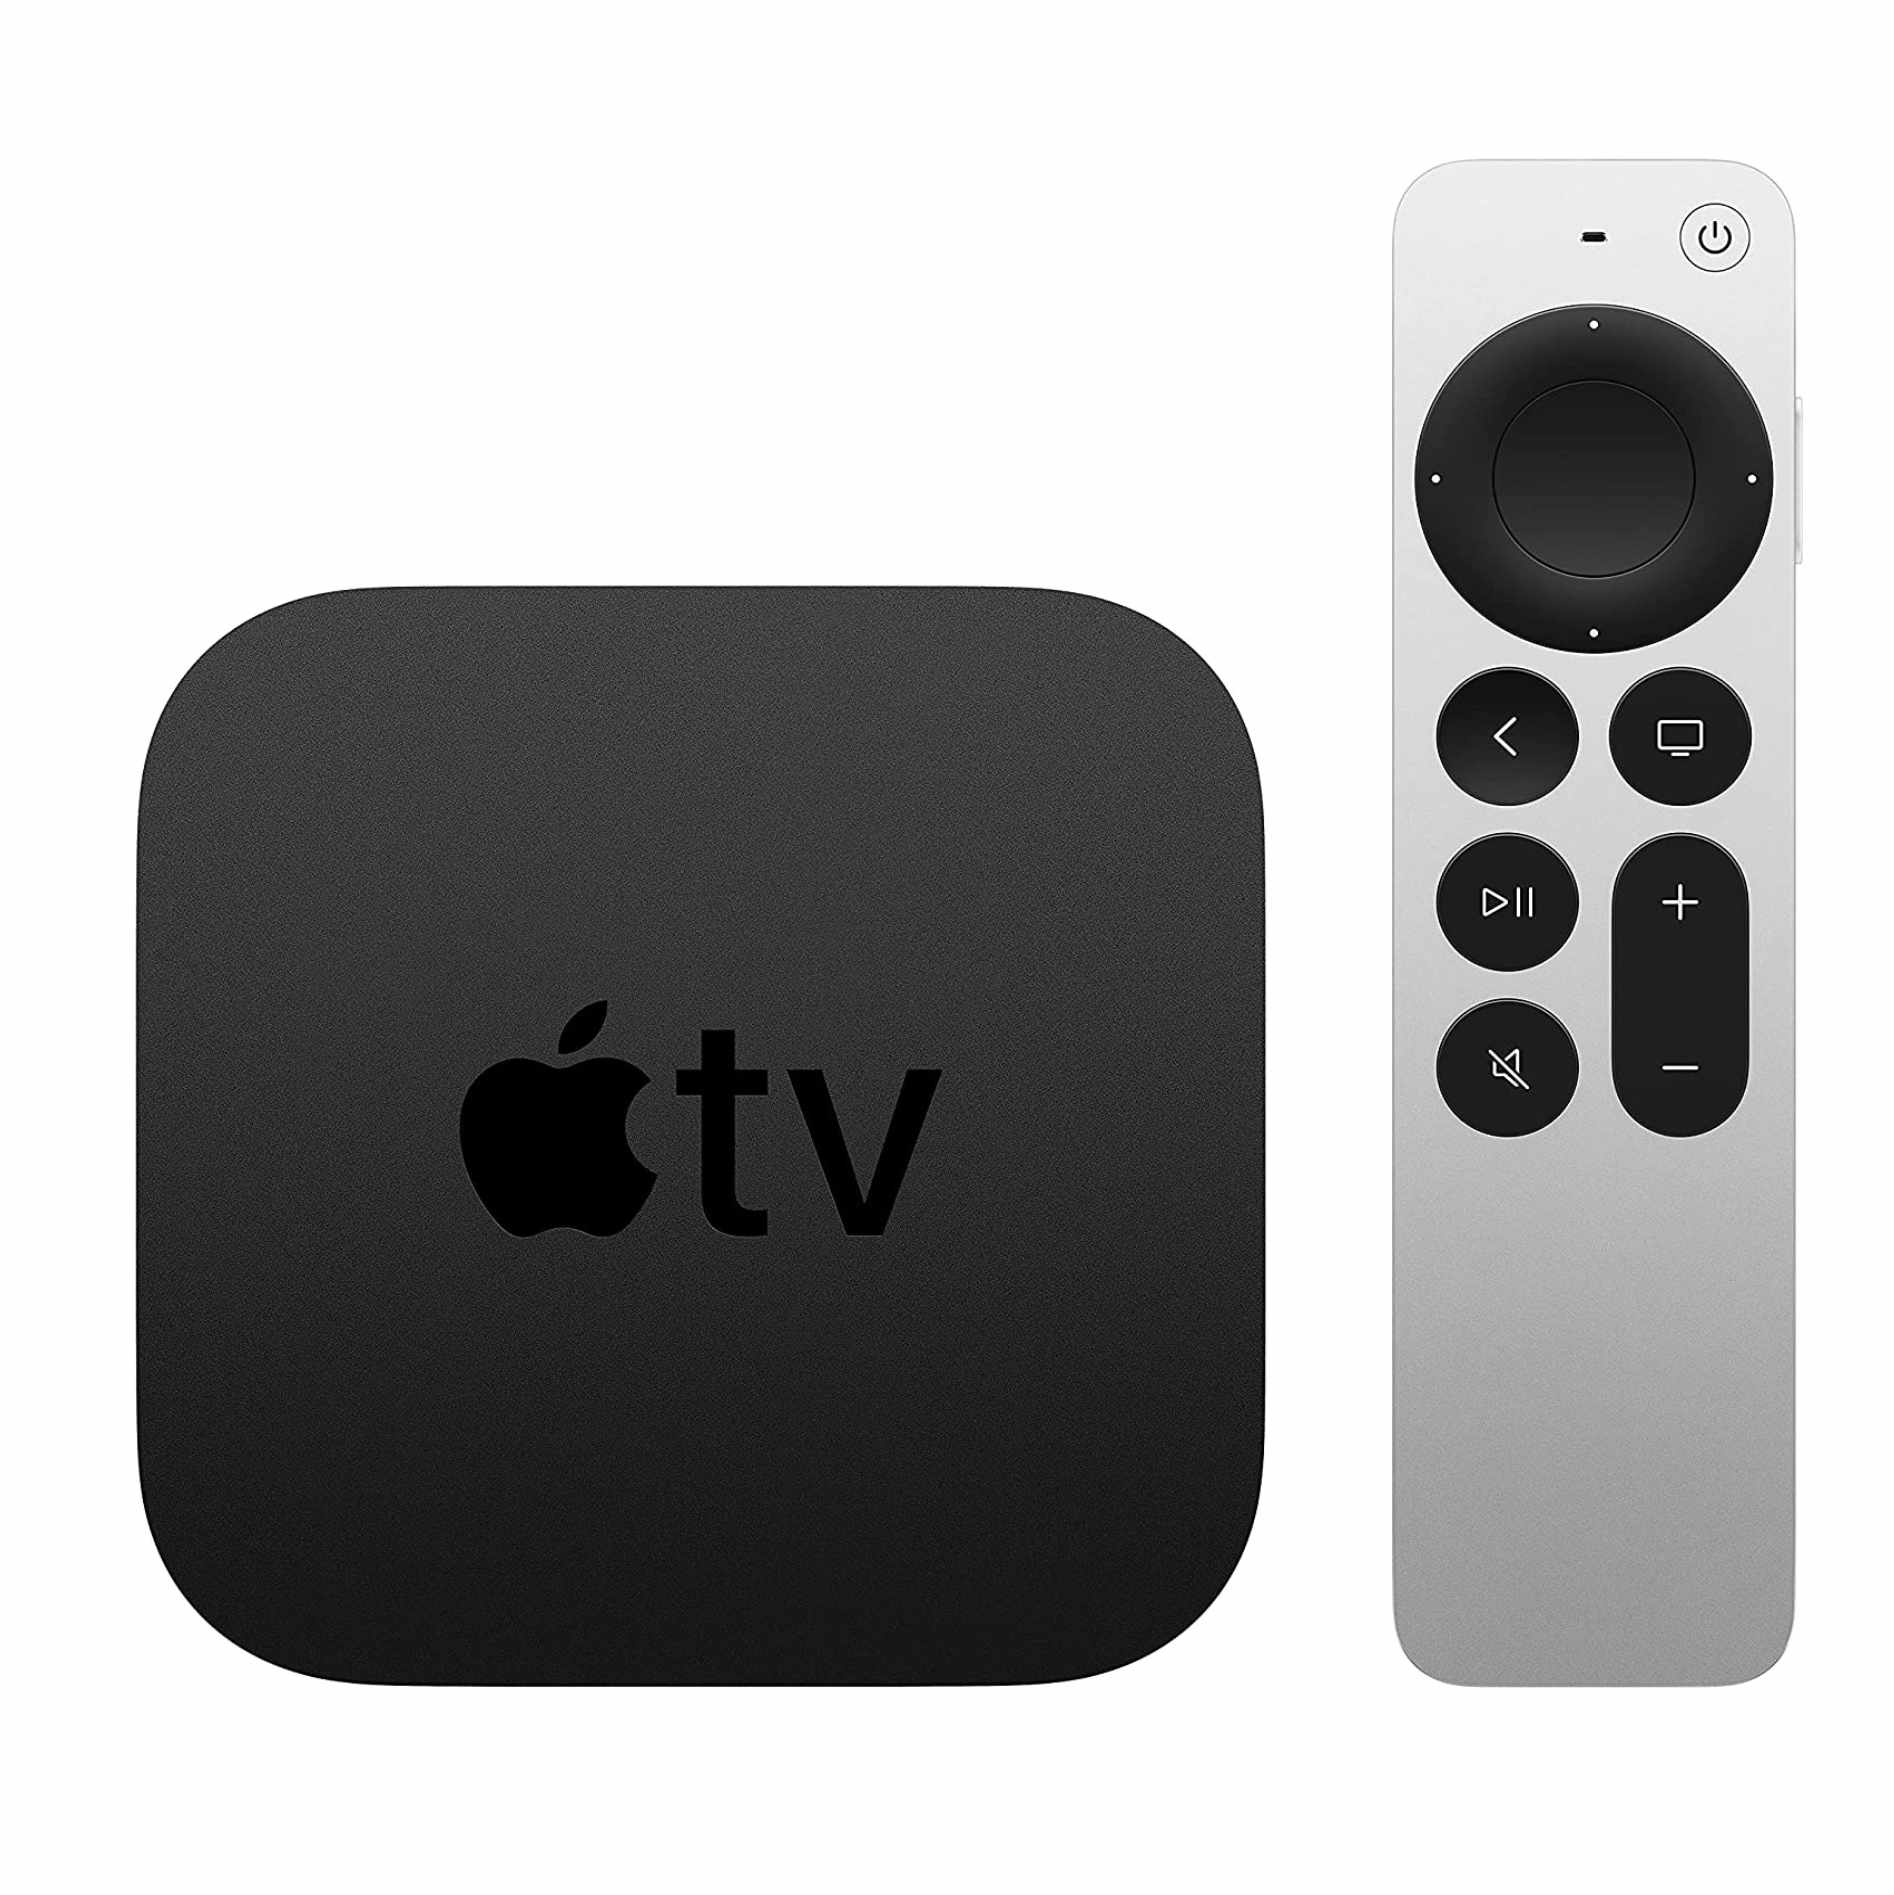 How Much Does Apple TV Cost? 2021